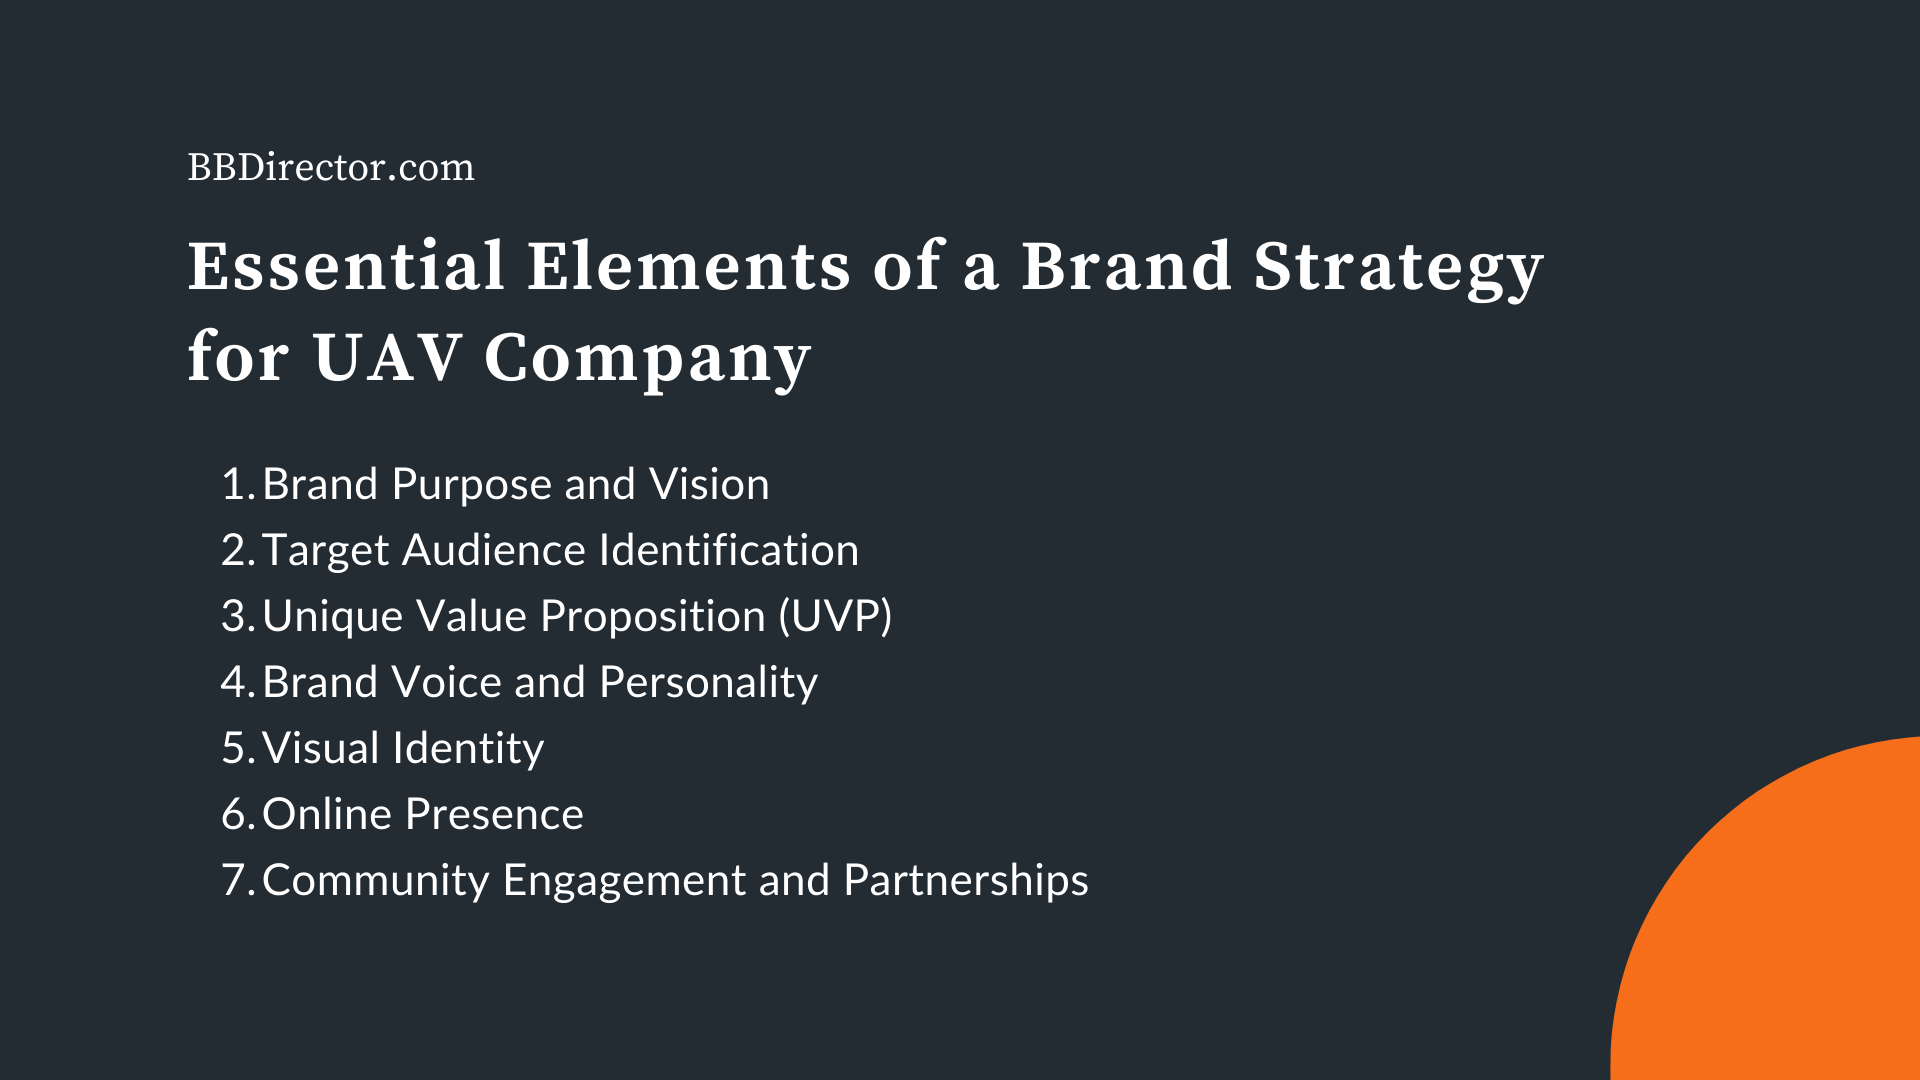 Essential Elements of a Brand Strategy for UAV Company